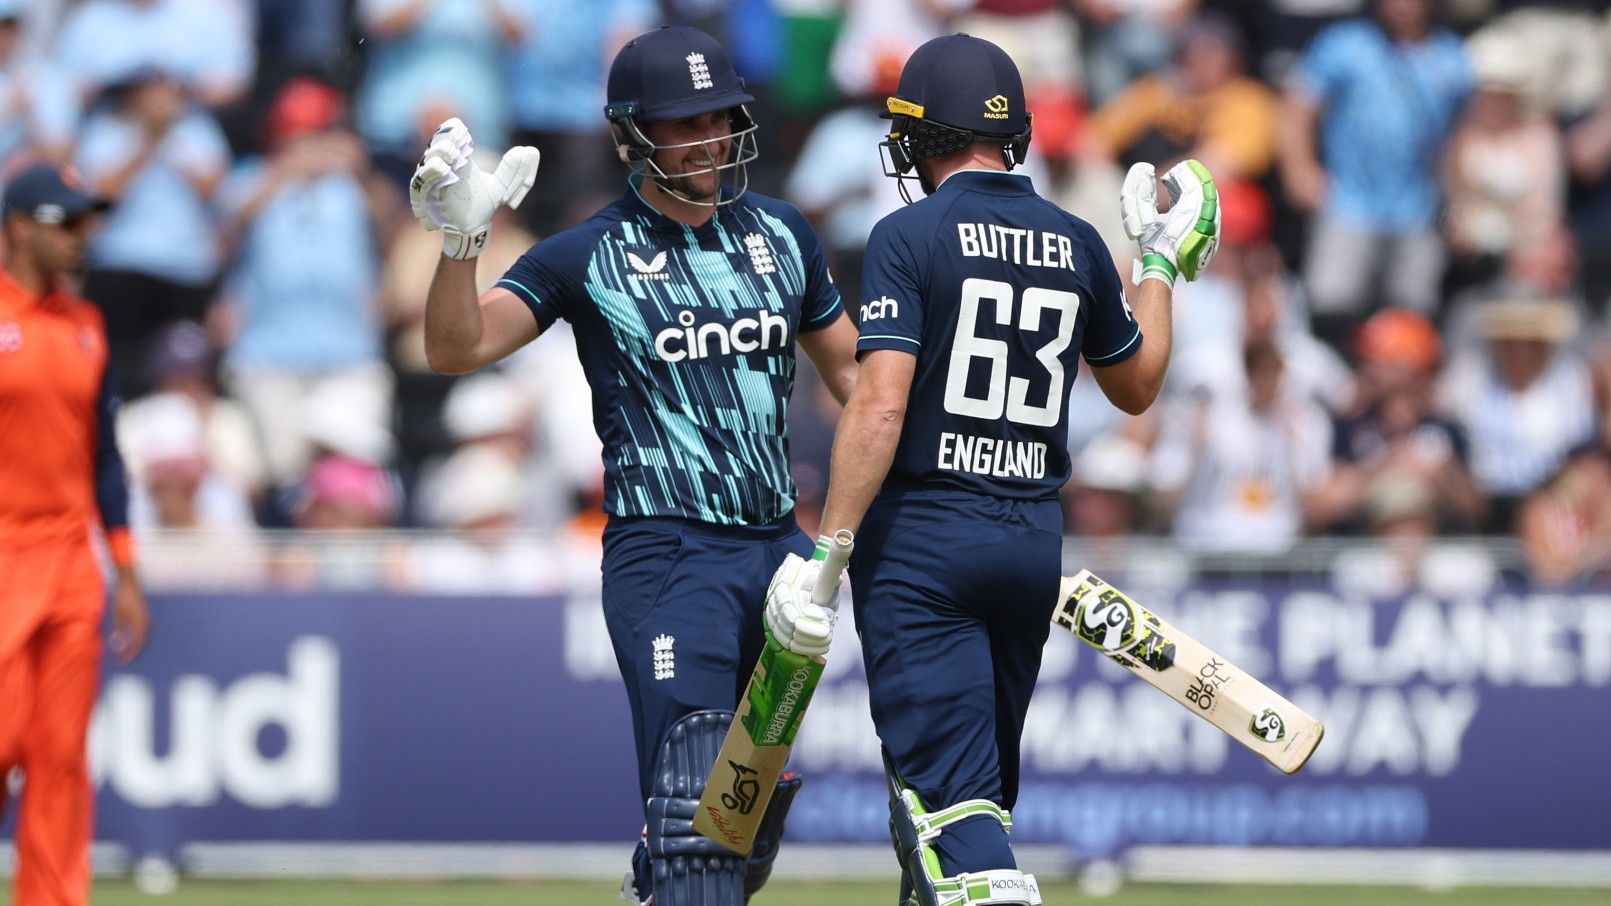 England hits ODI world-record 498-4 in win over Netherlands